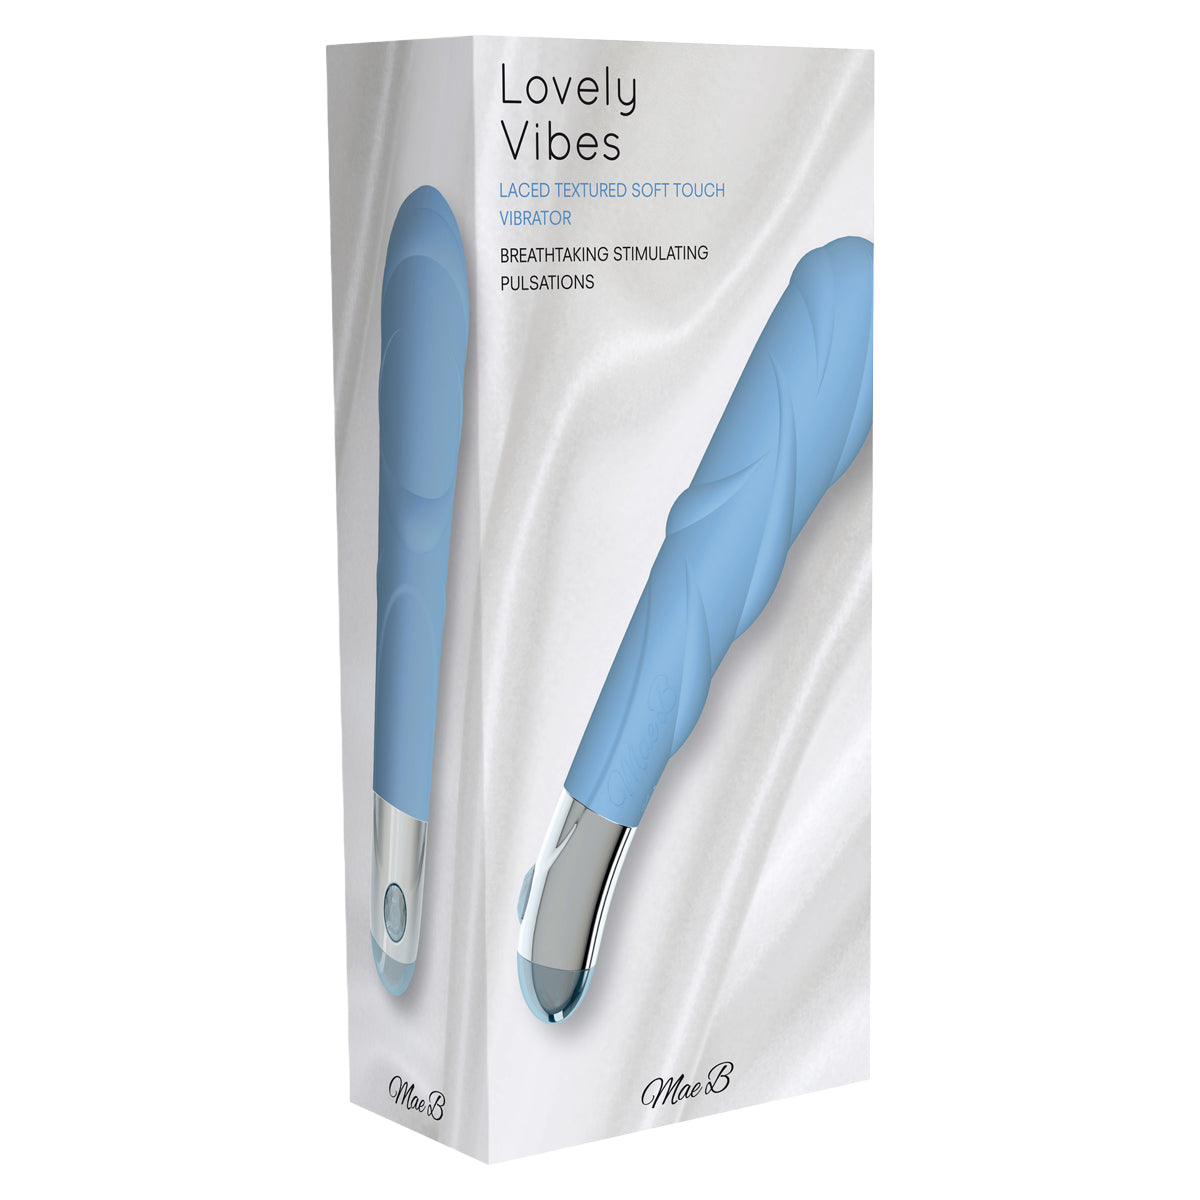 Mae B Lovely Vibes - Laced Textured Soft Touch Vibrator - Blue